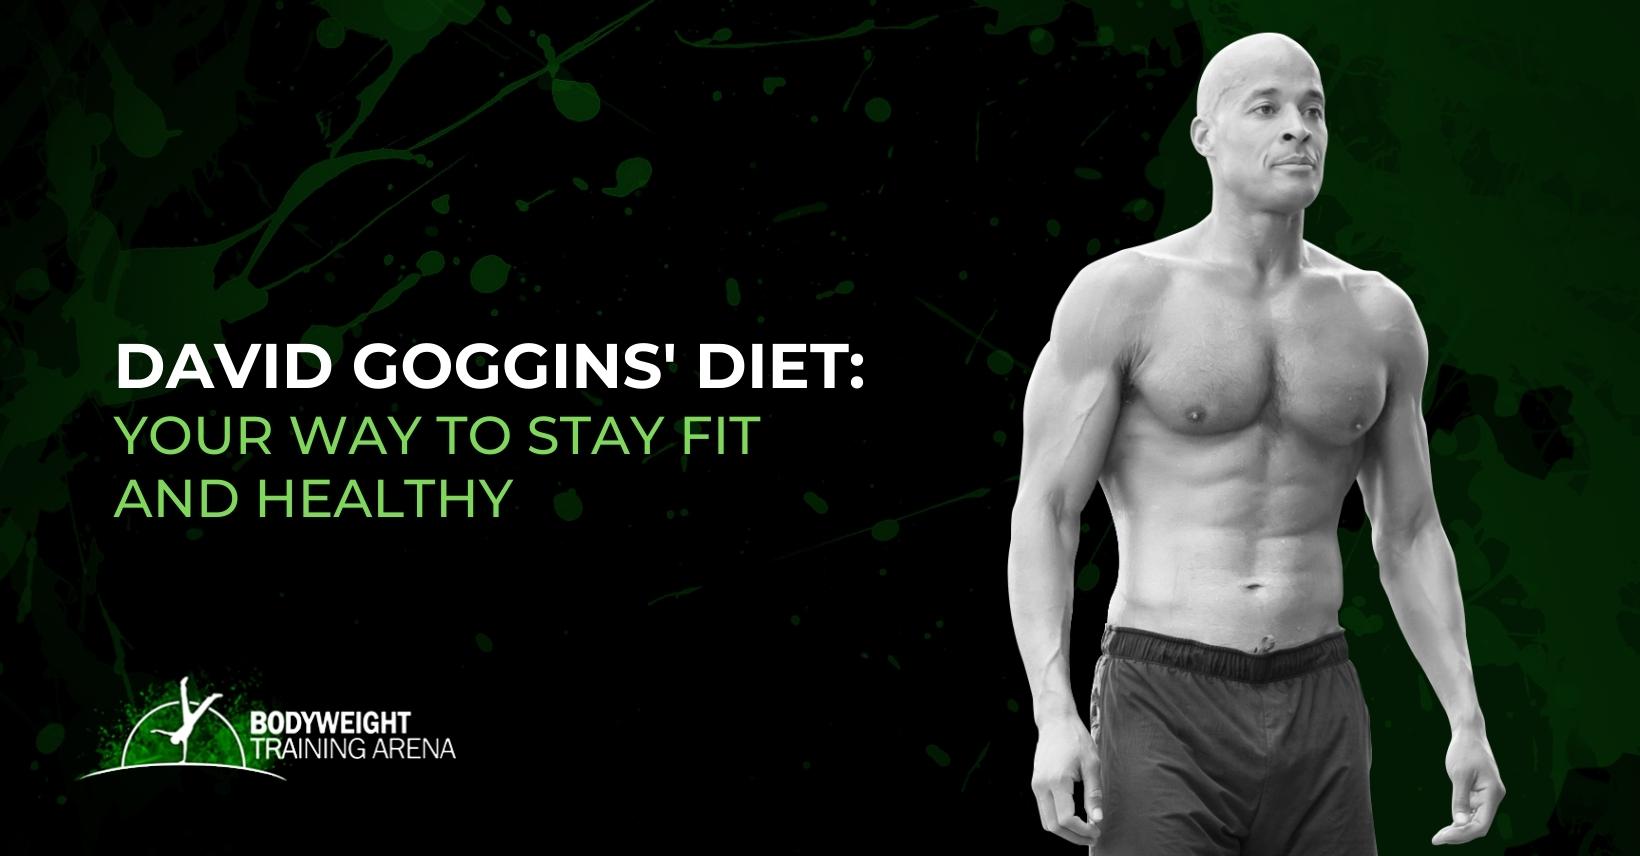 David Goggins’ Diet: Your Way to Stay Fit and Healthy